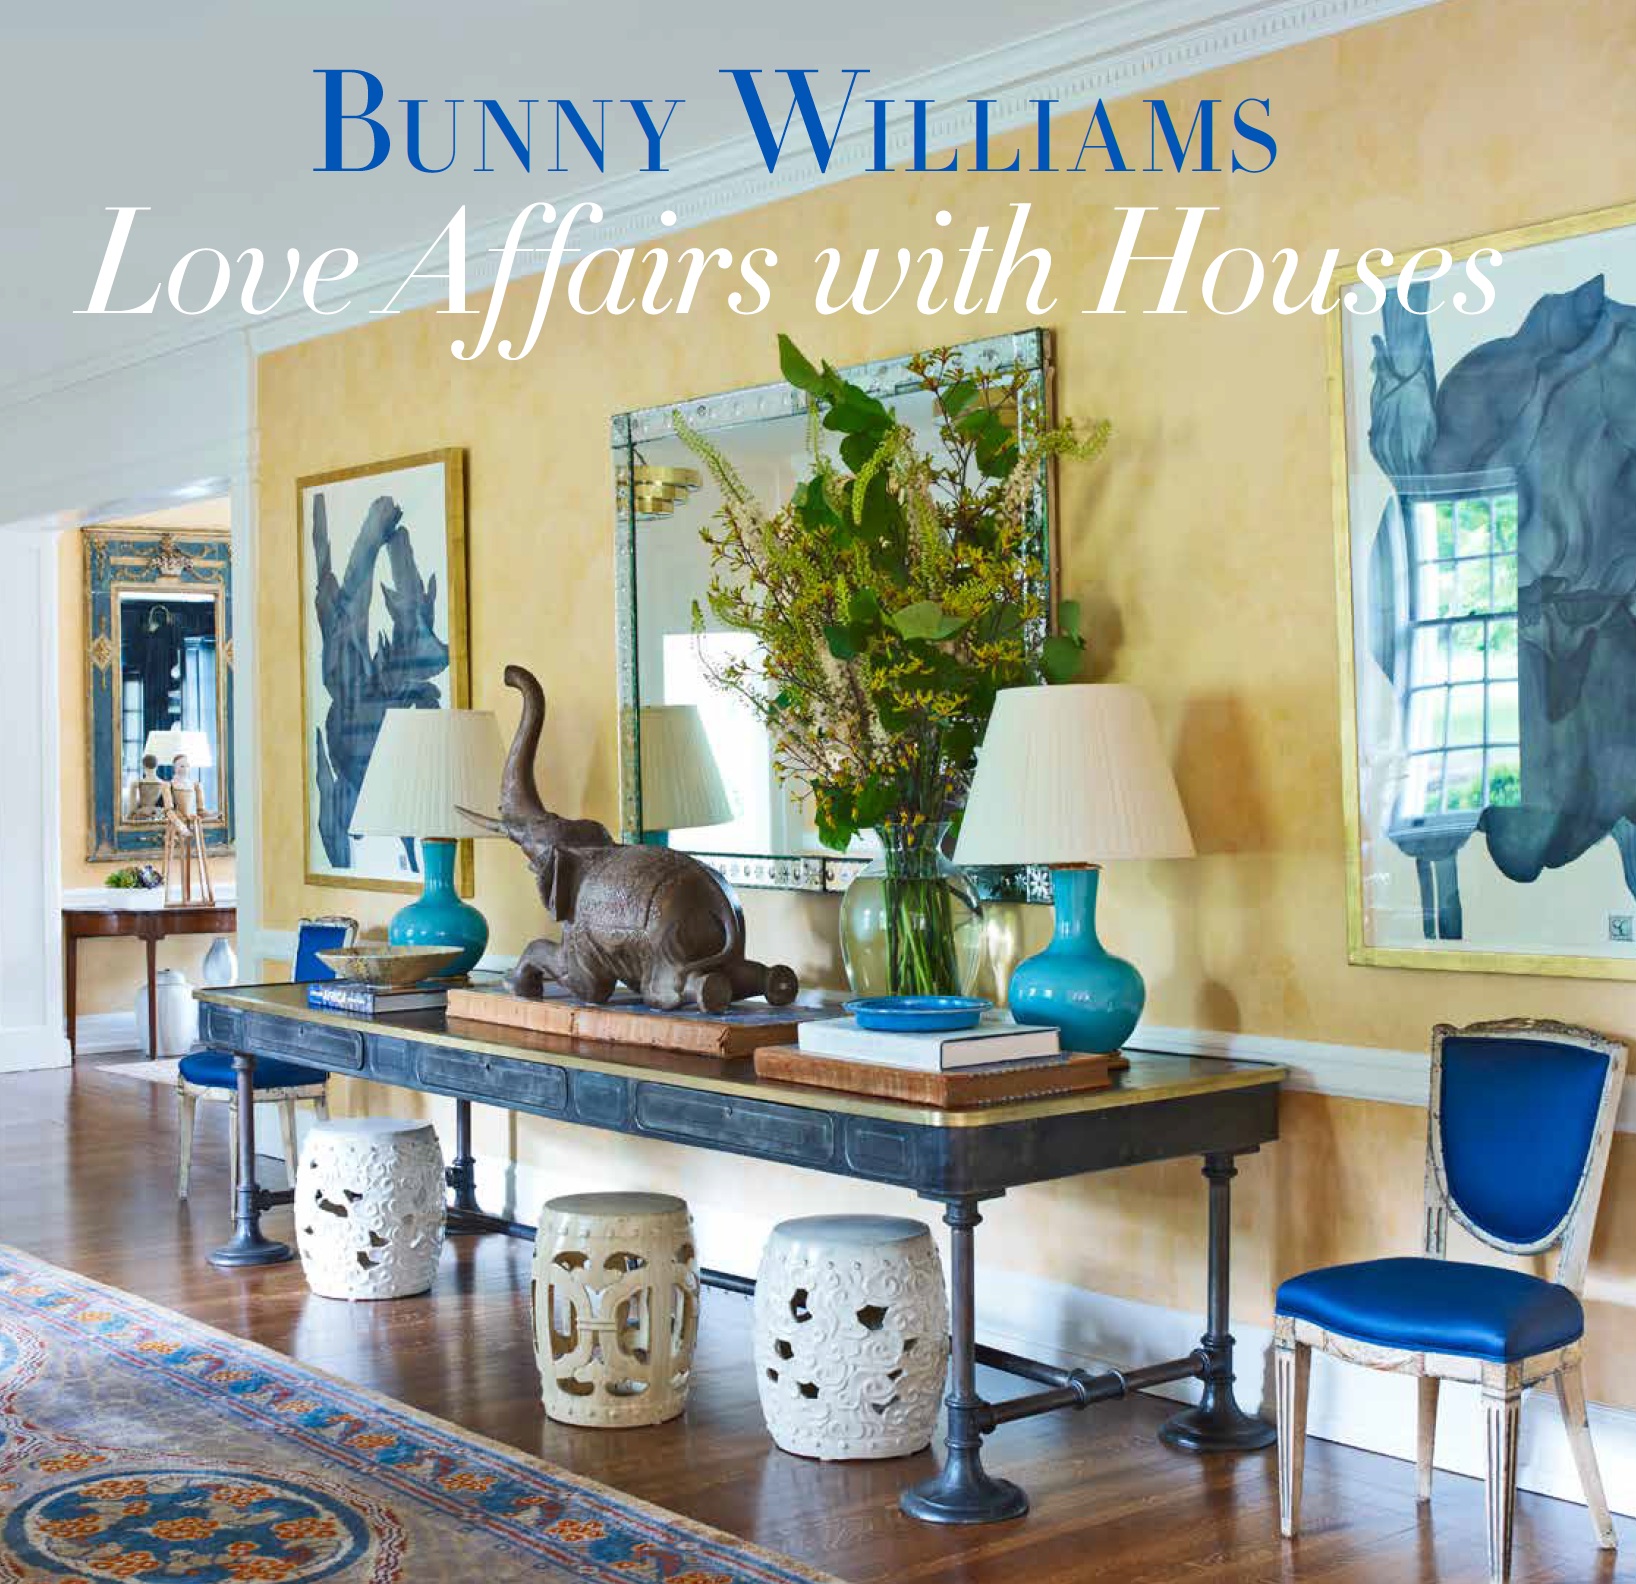 Bunny Williams: Love Affairs with Houses